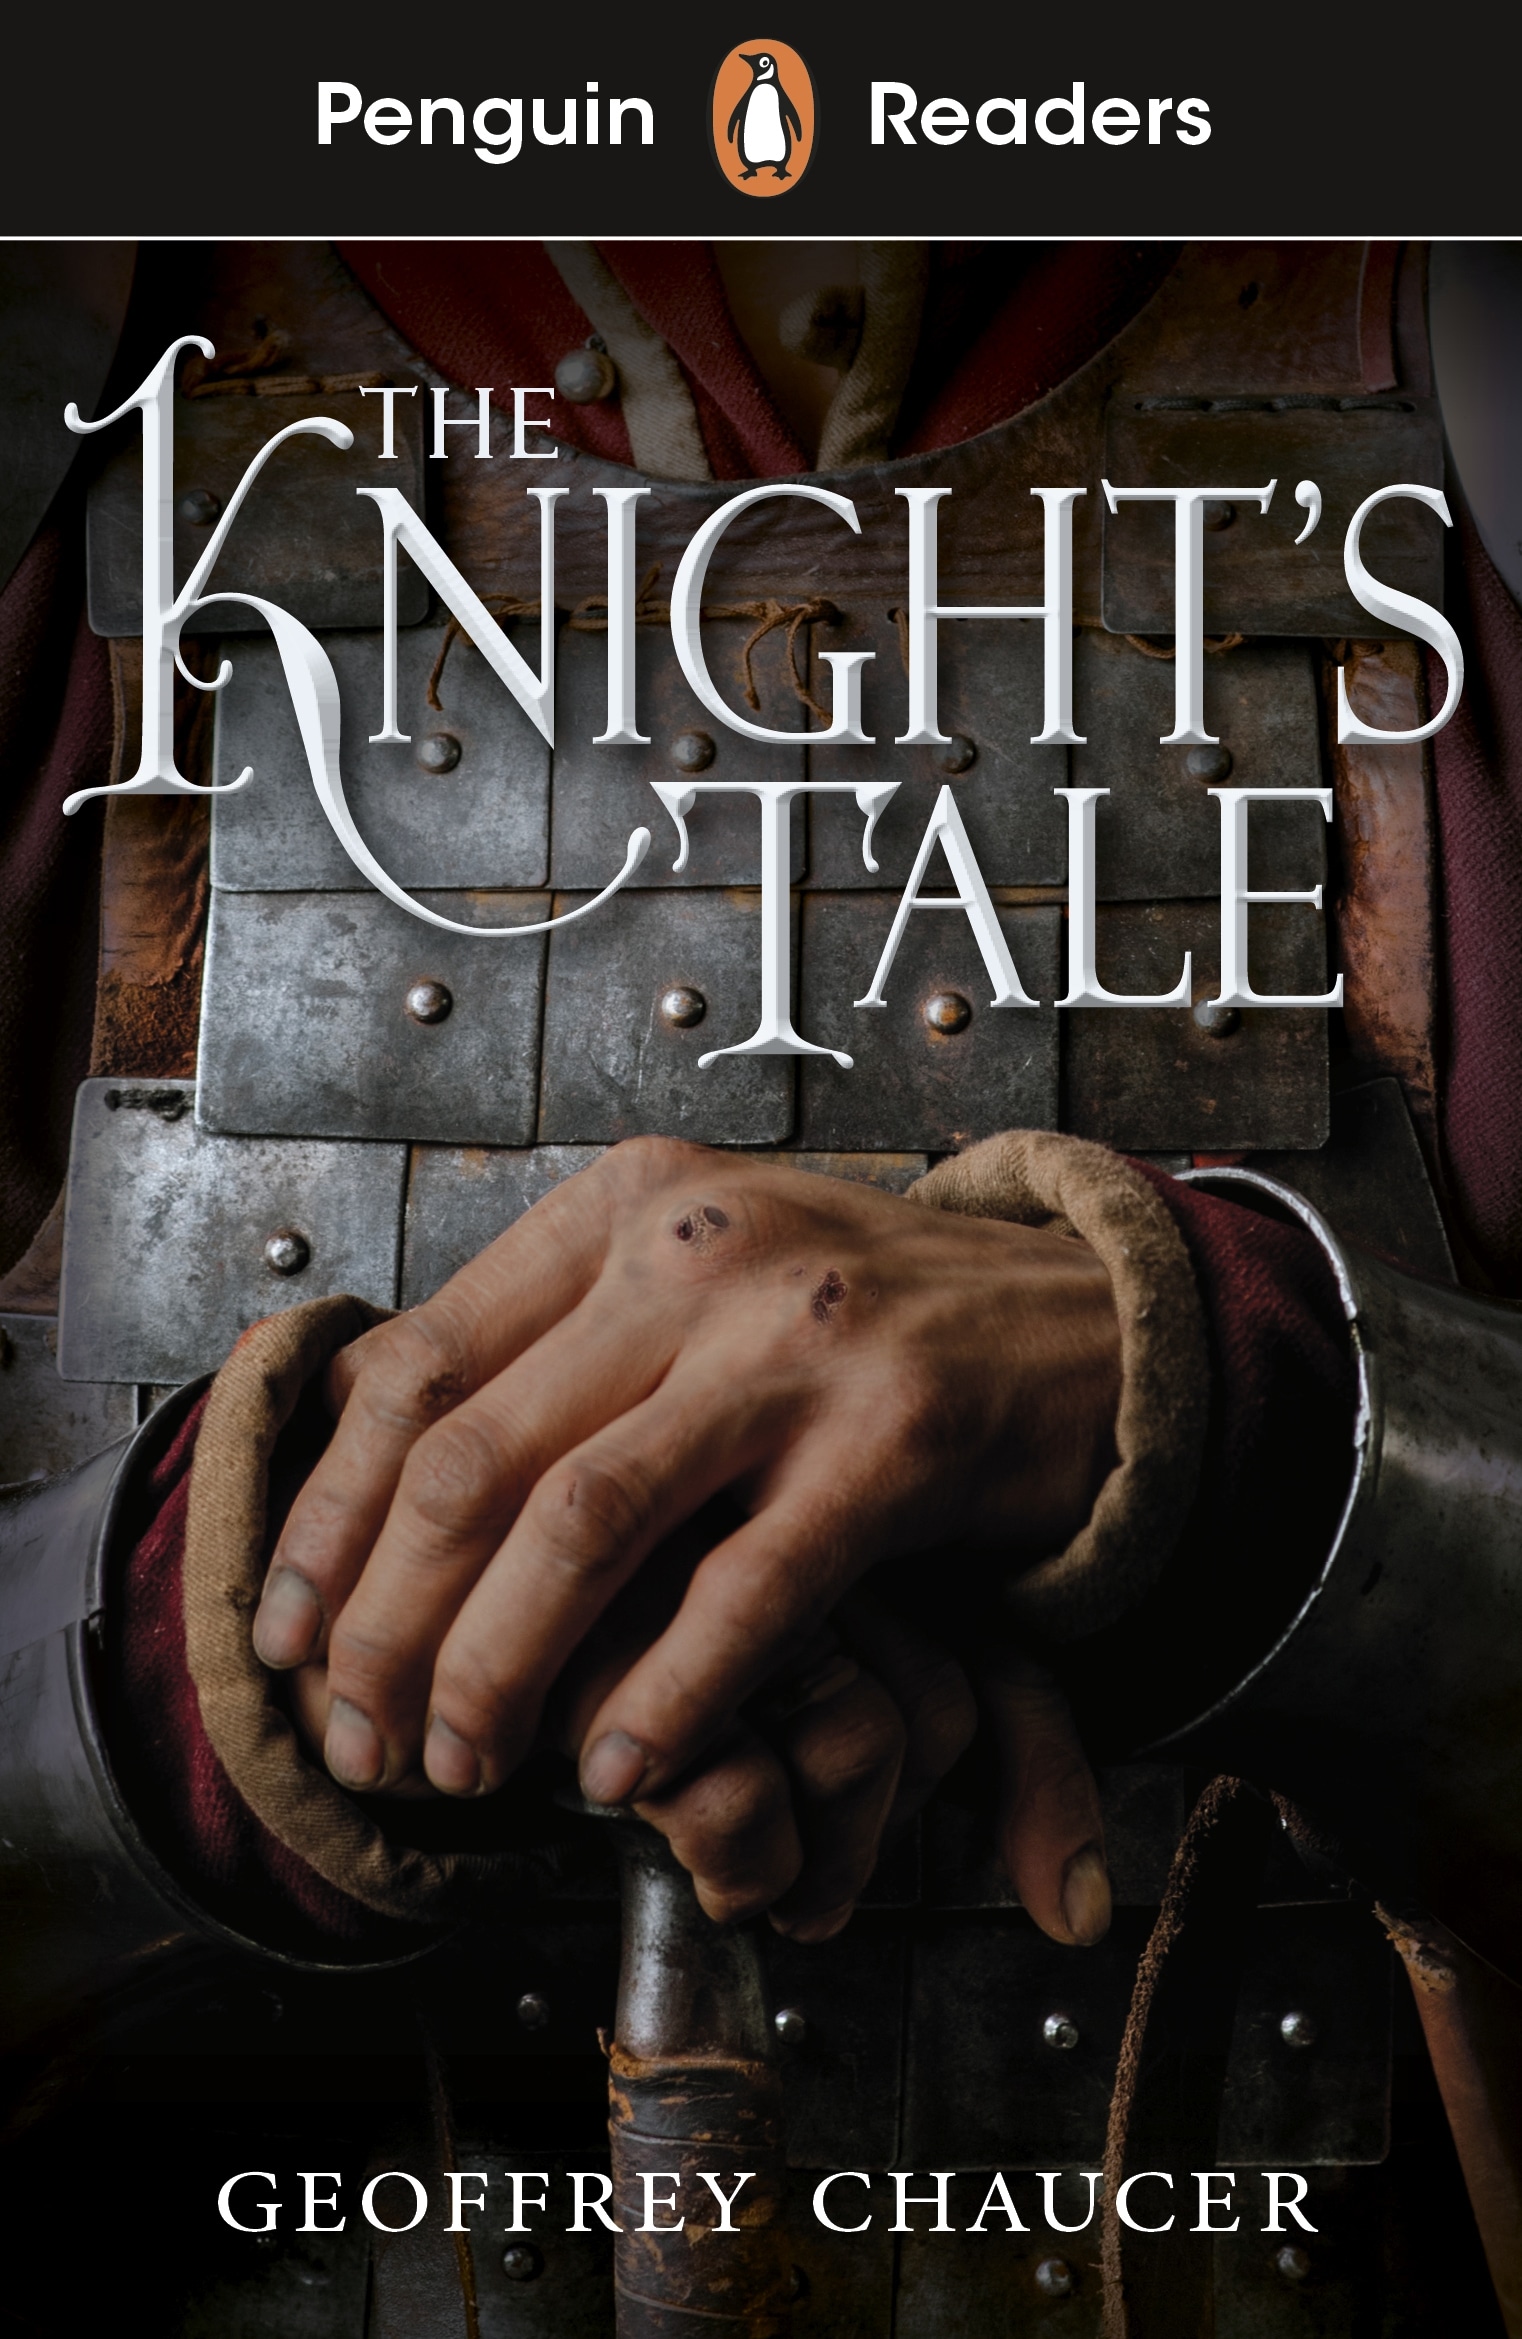 Book “Penguin Readers Starter Level: The Knight's Tale (ELT Graded Reader)” by Geoffrey Chaucer — September 30, 2021